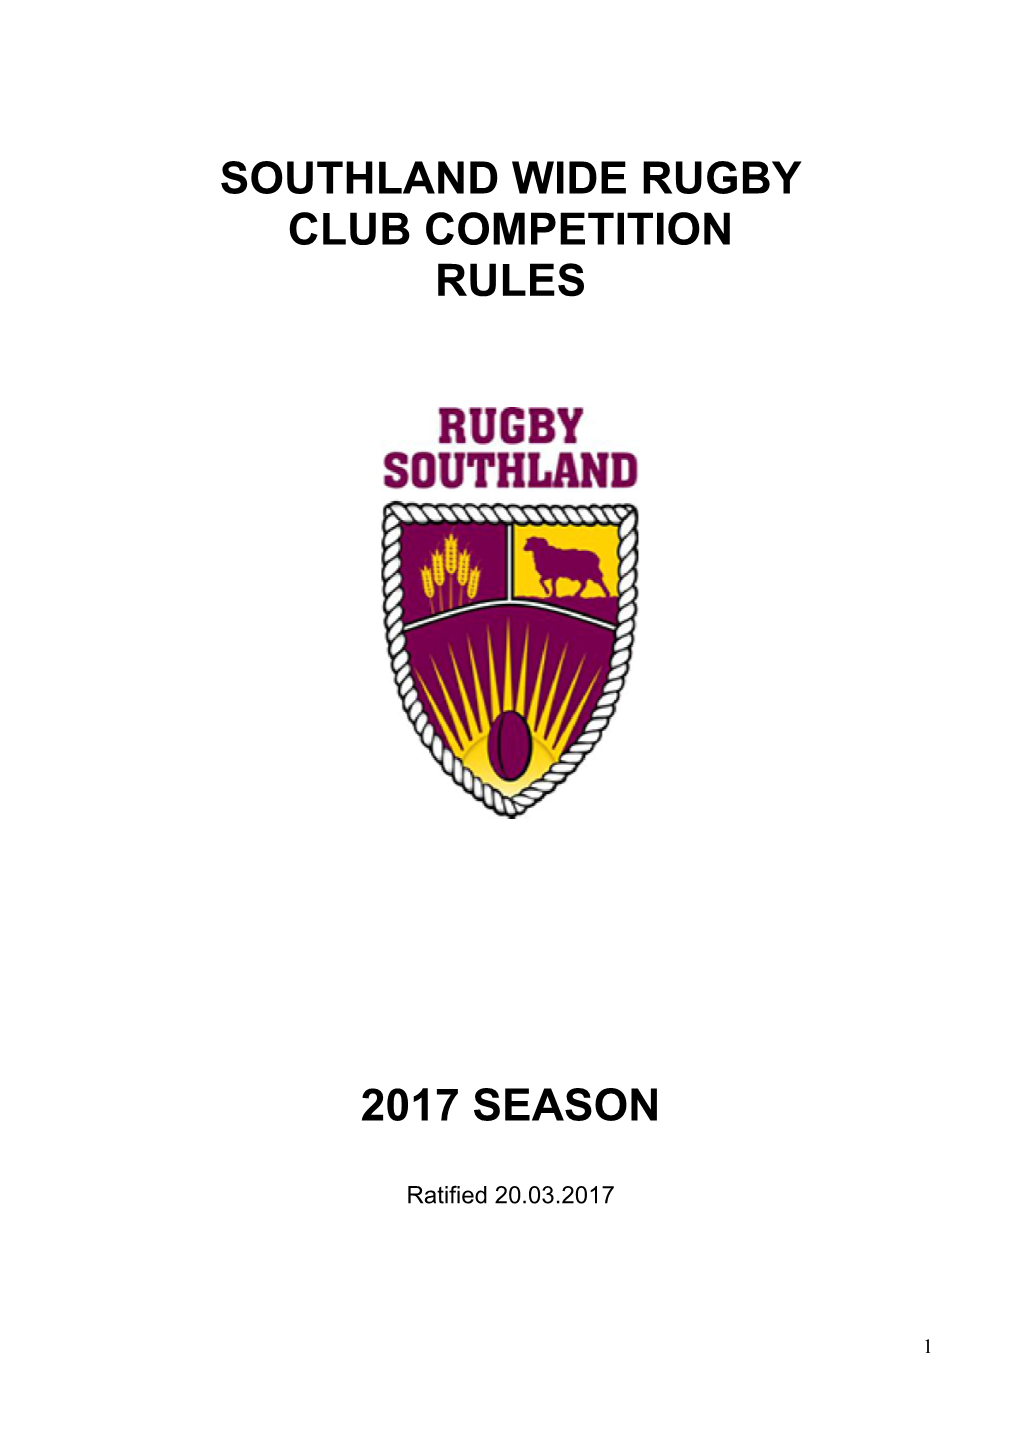 Southland Wide Rugby Club Competition Rules 2017